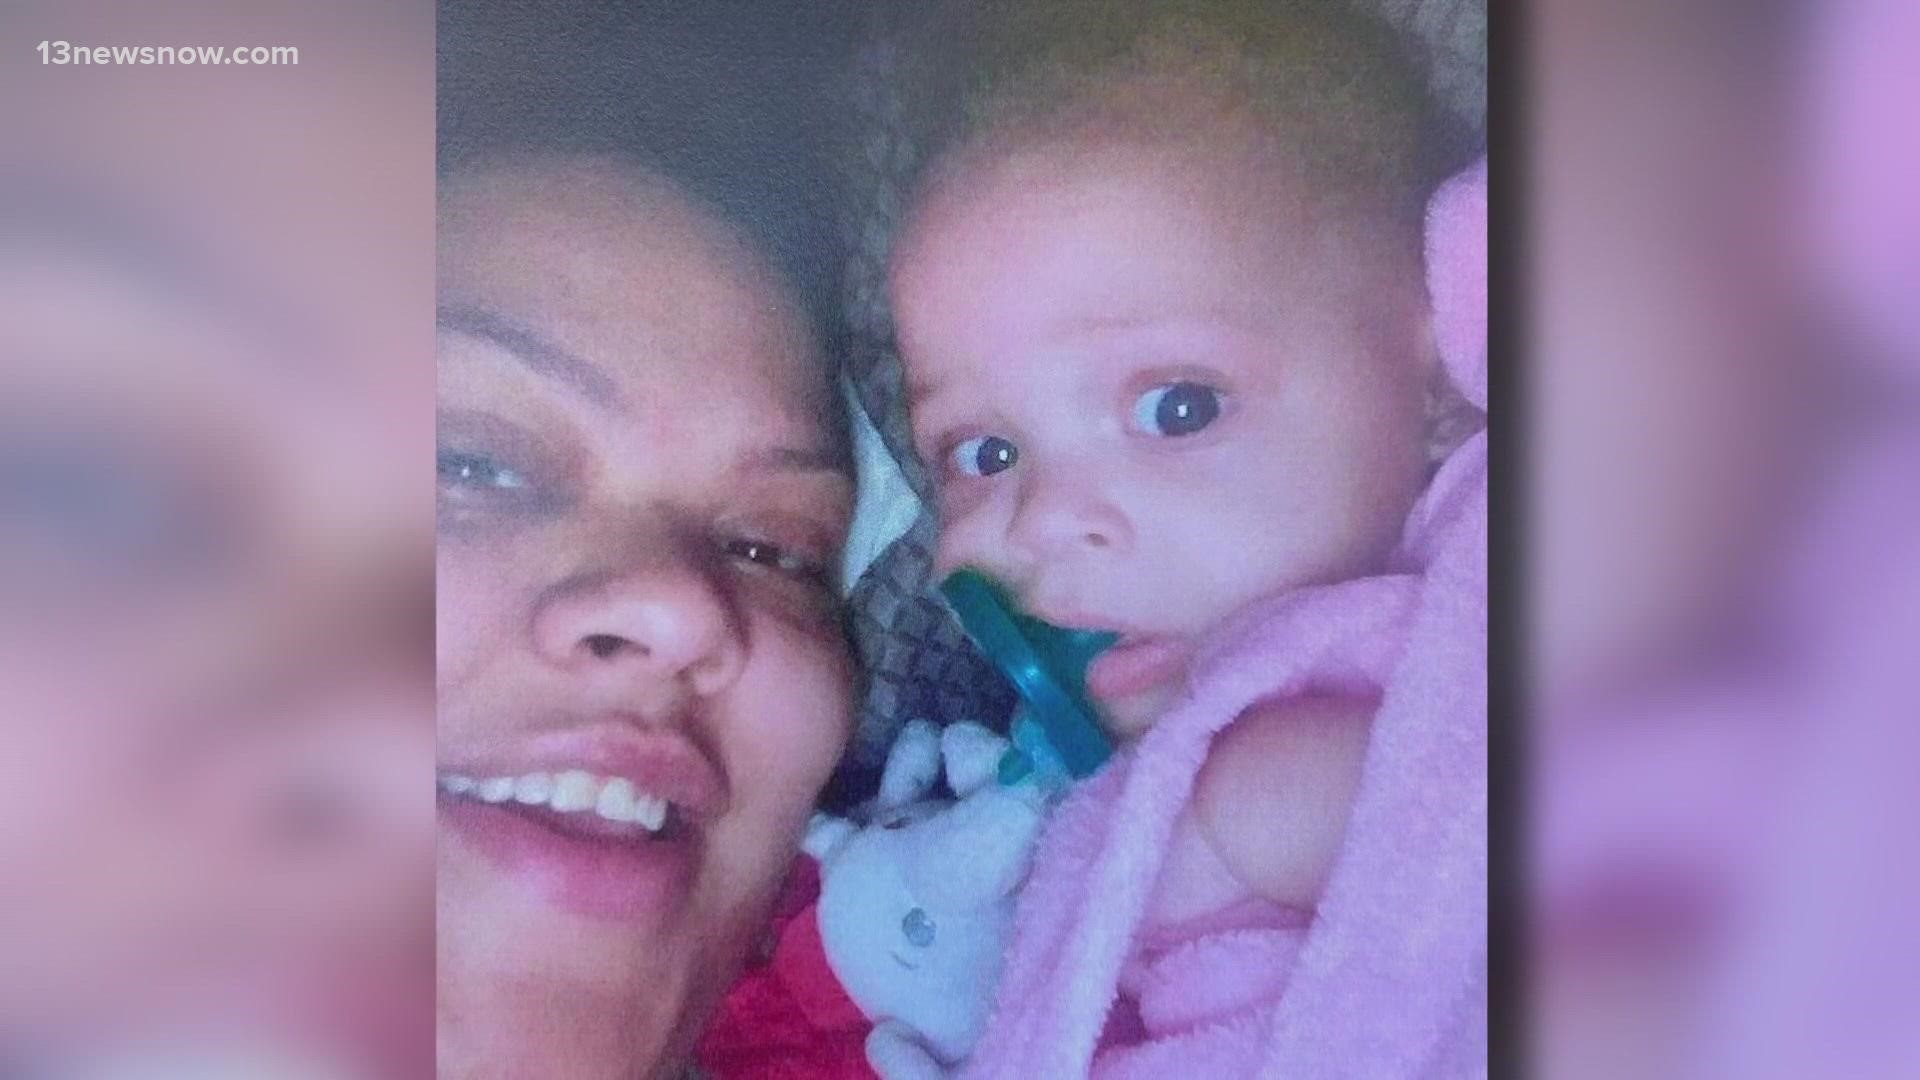 Baby Amelia died in April after a driver rear-ended her mother's car, which had broken down in Isle of Wight county. The driver was charged with reckless driving.